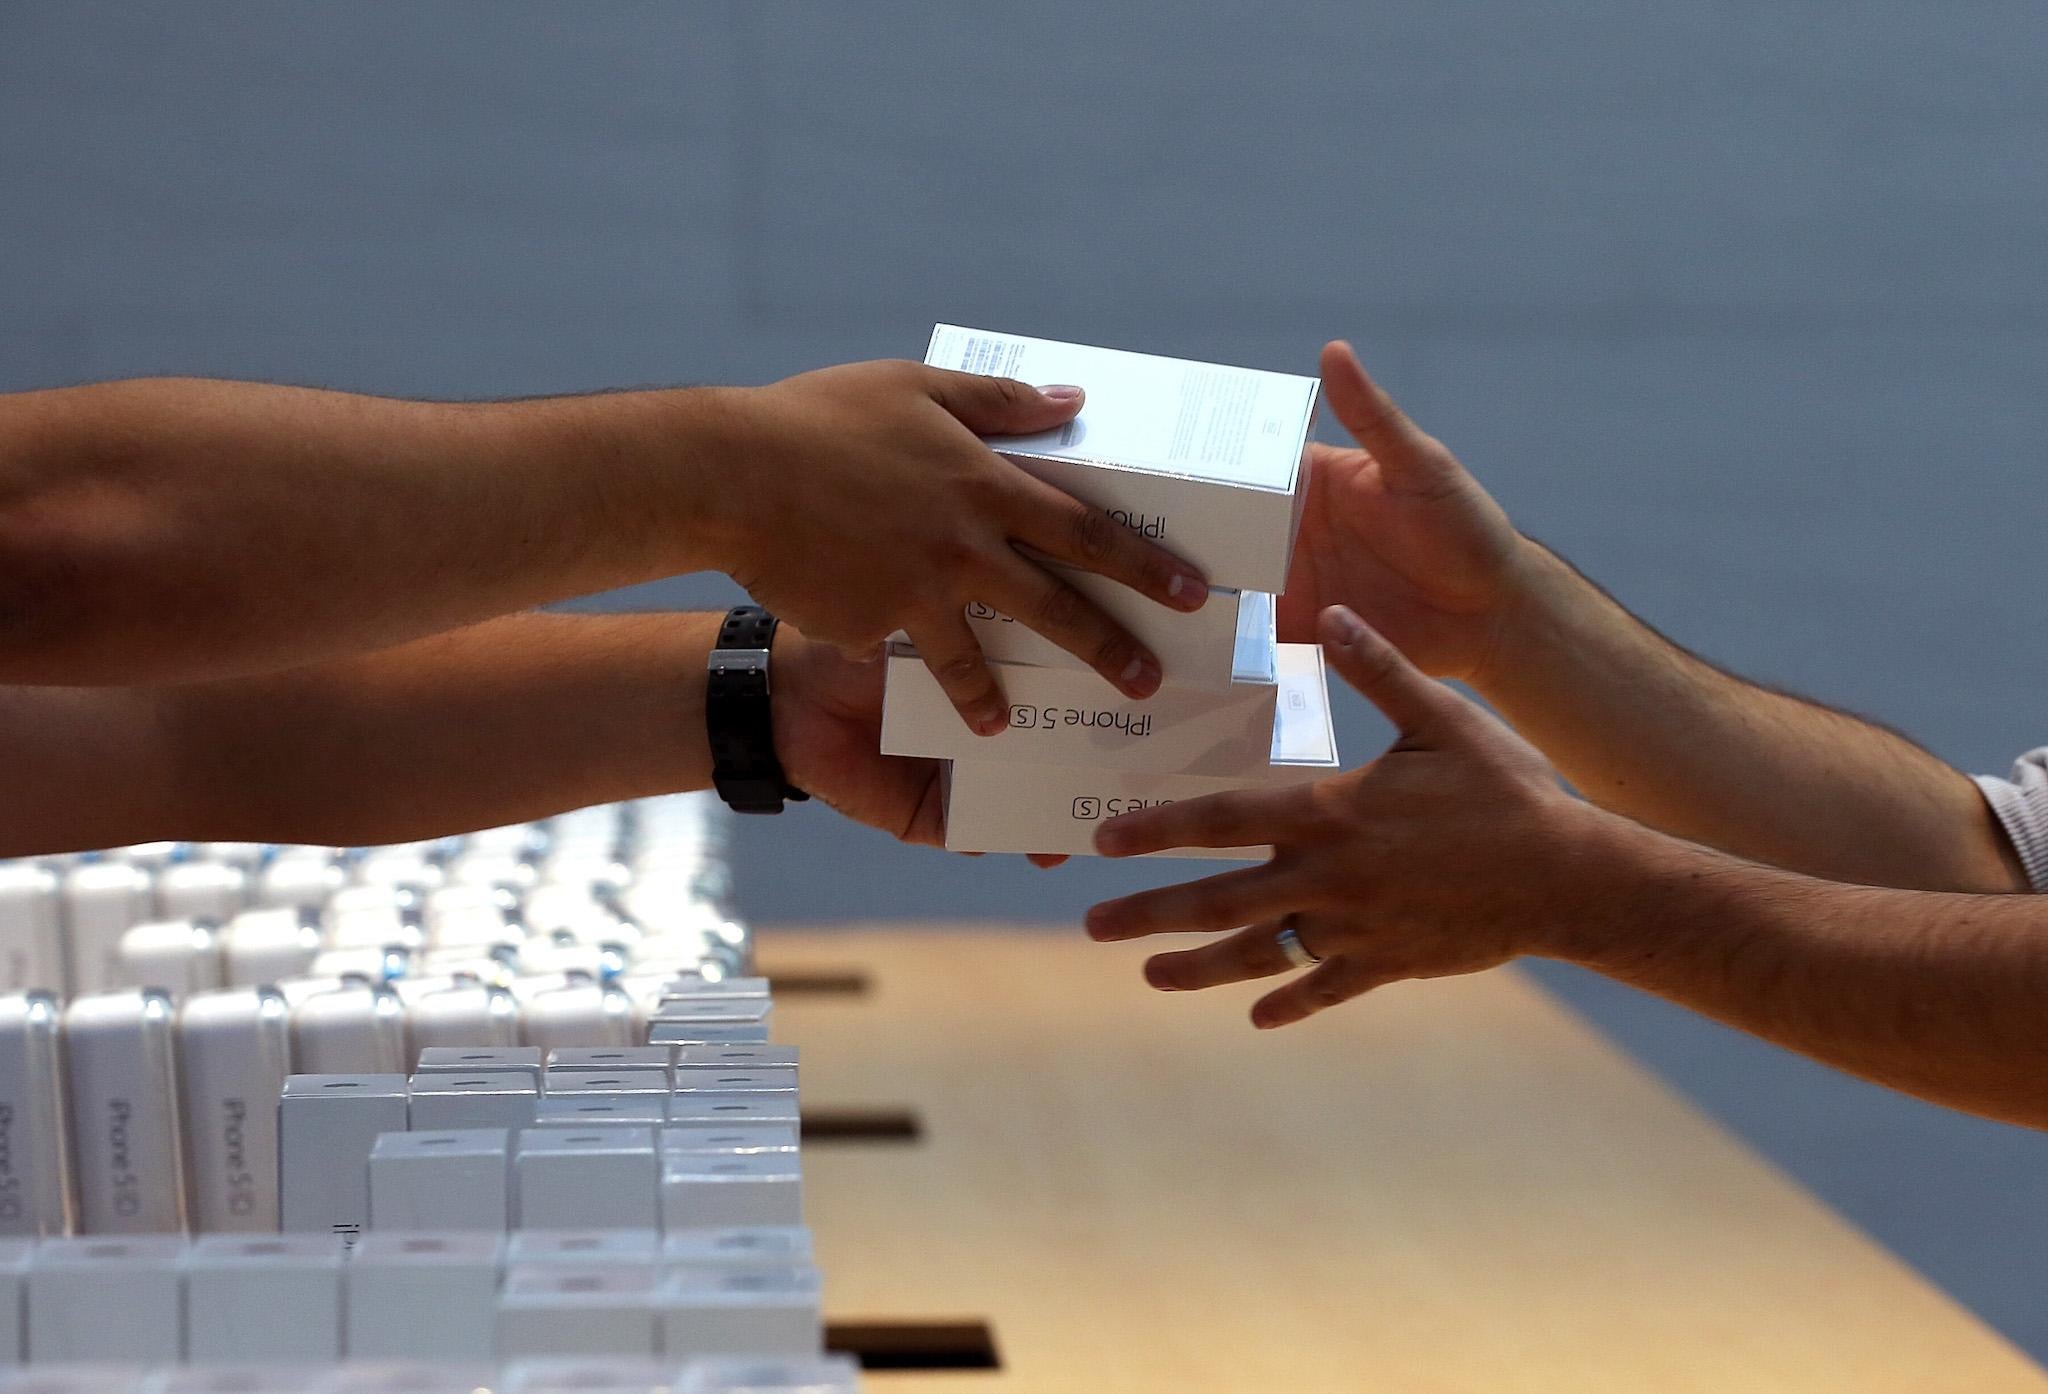 Apple Store employees pass boxes of the new Apple iPhone 5S on September 20, 2013 in Palo Alto, California